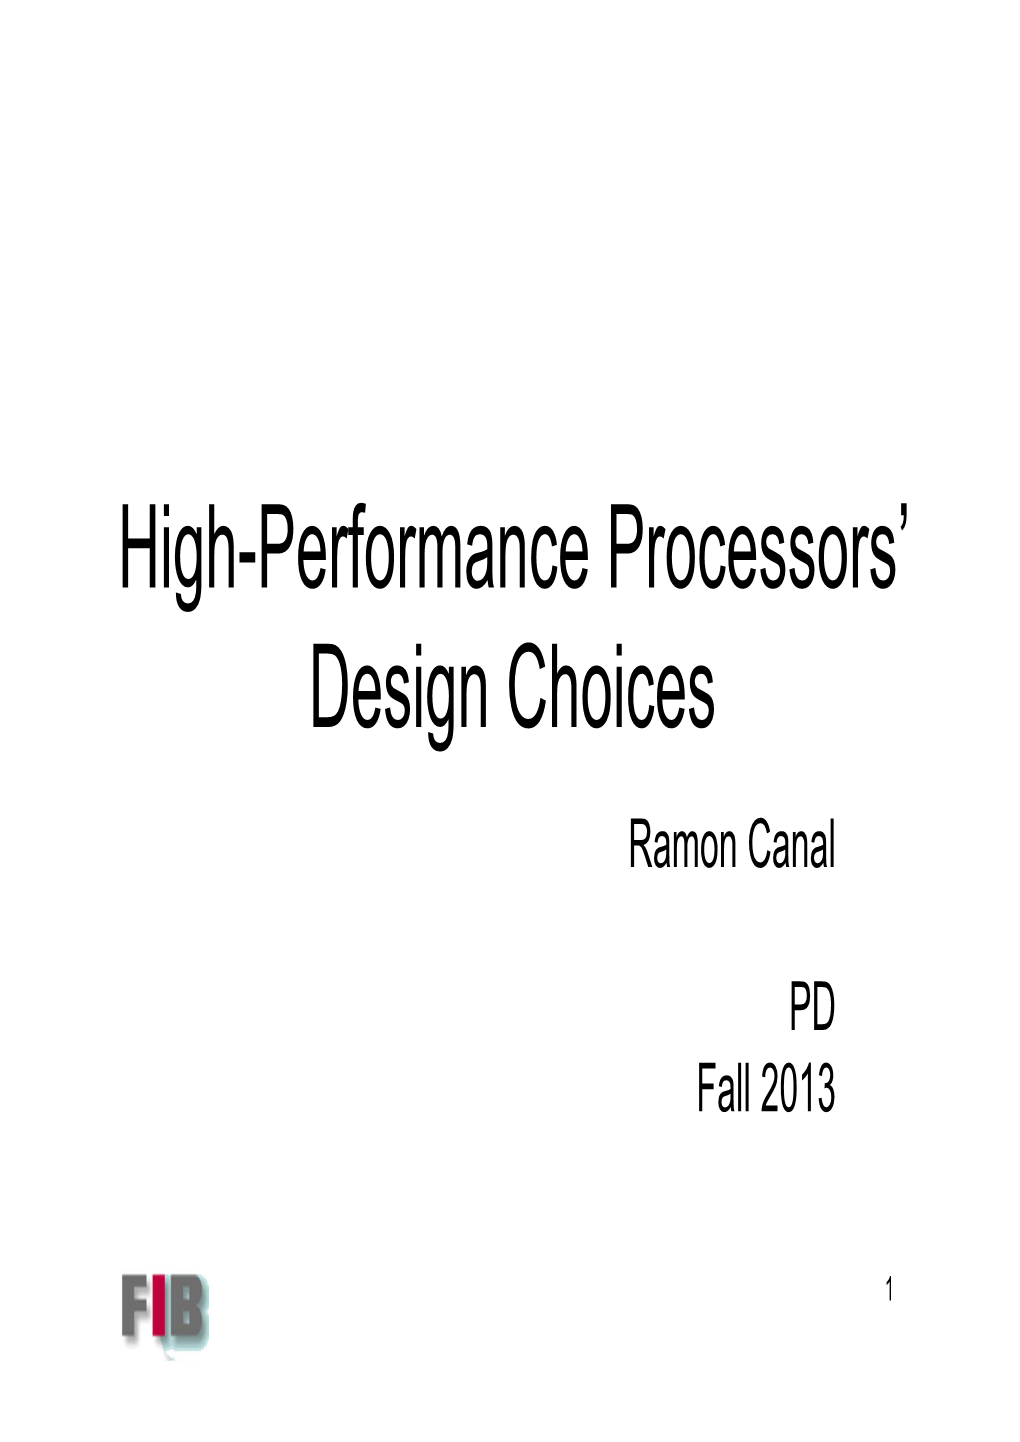 High-Performance Processors' Design Choices